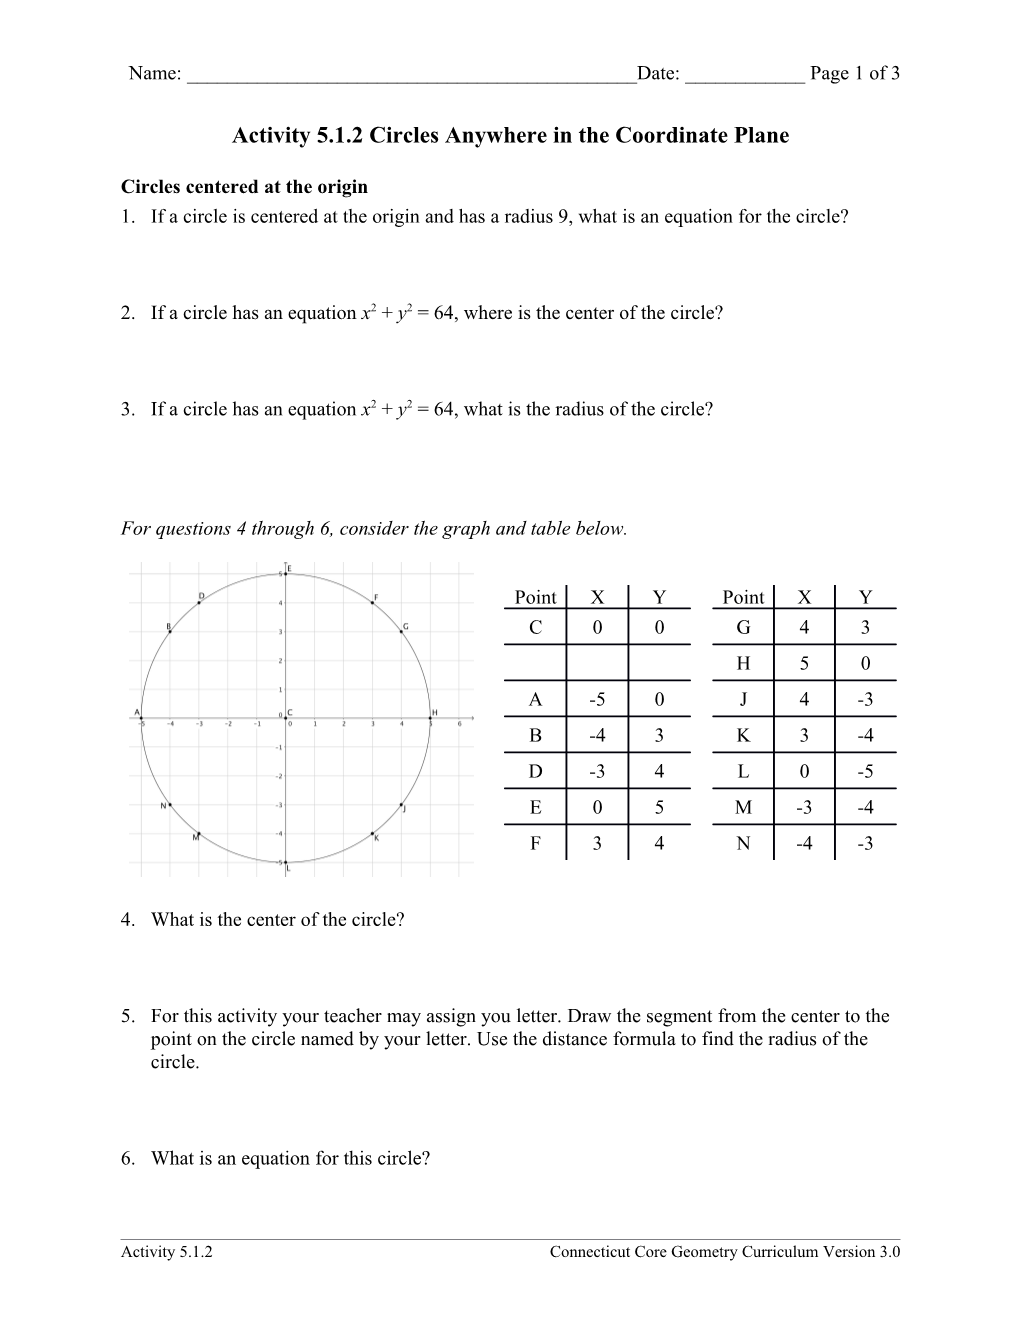 Activity 5.1.2 Circles Anywhere in the Coordinate Plane